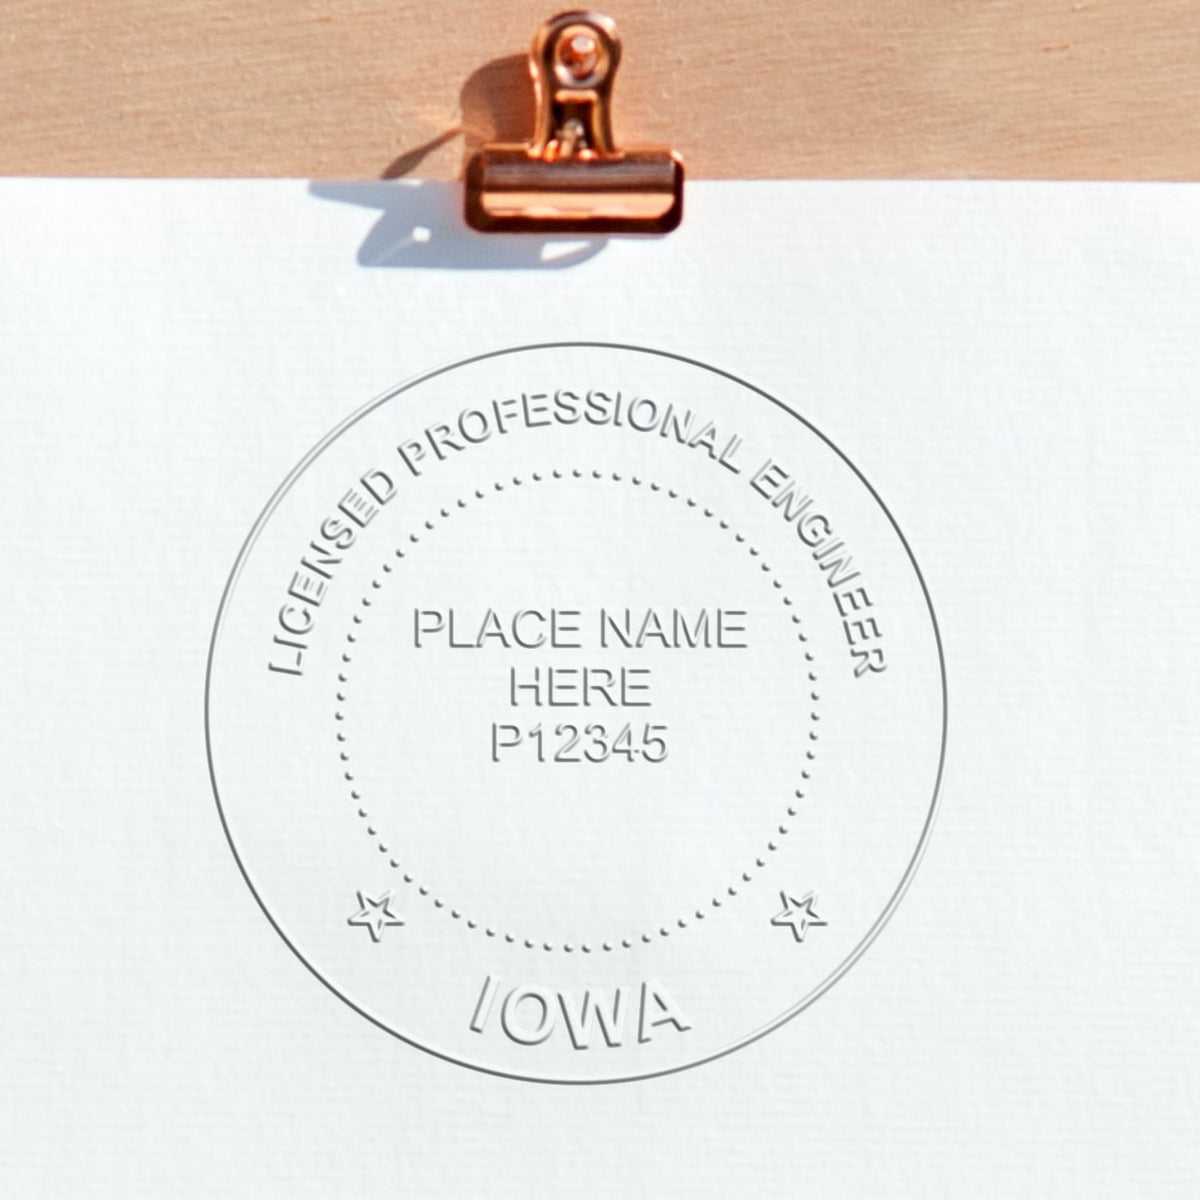 The Heavy Duty Cast Iron Iowa Engineer Seal Embosser stamp impression comes to life with a crisp, detailed photo on paper - showcasing true professional quality.